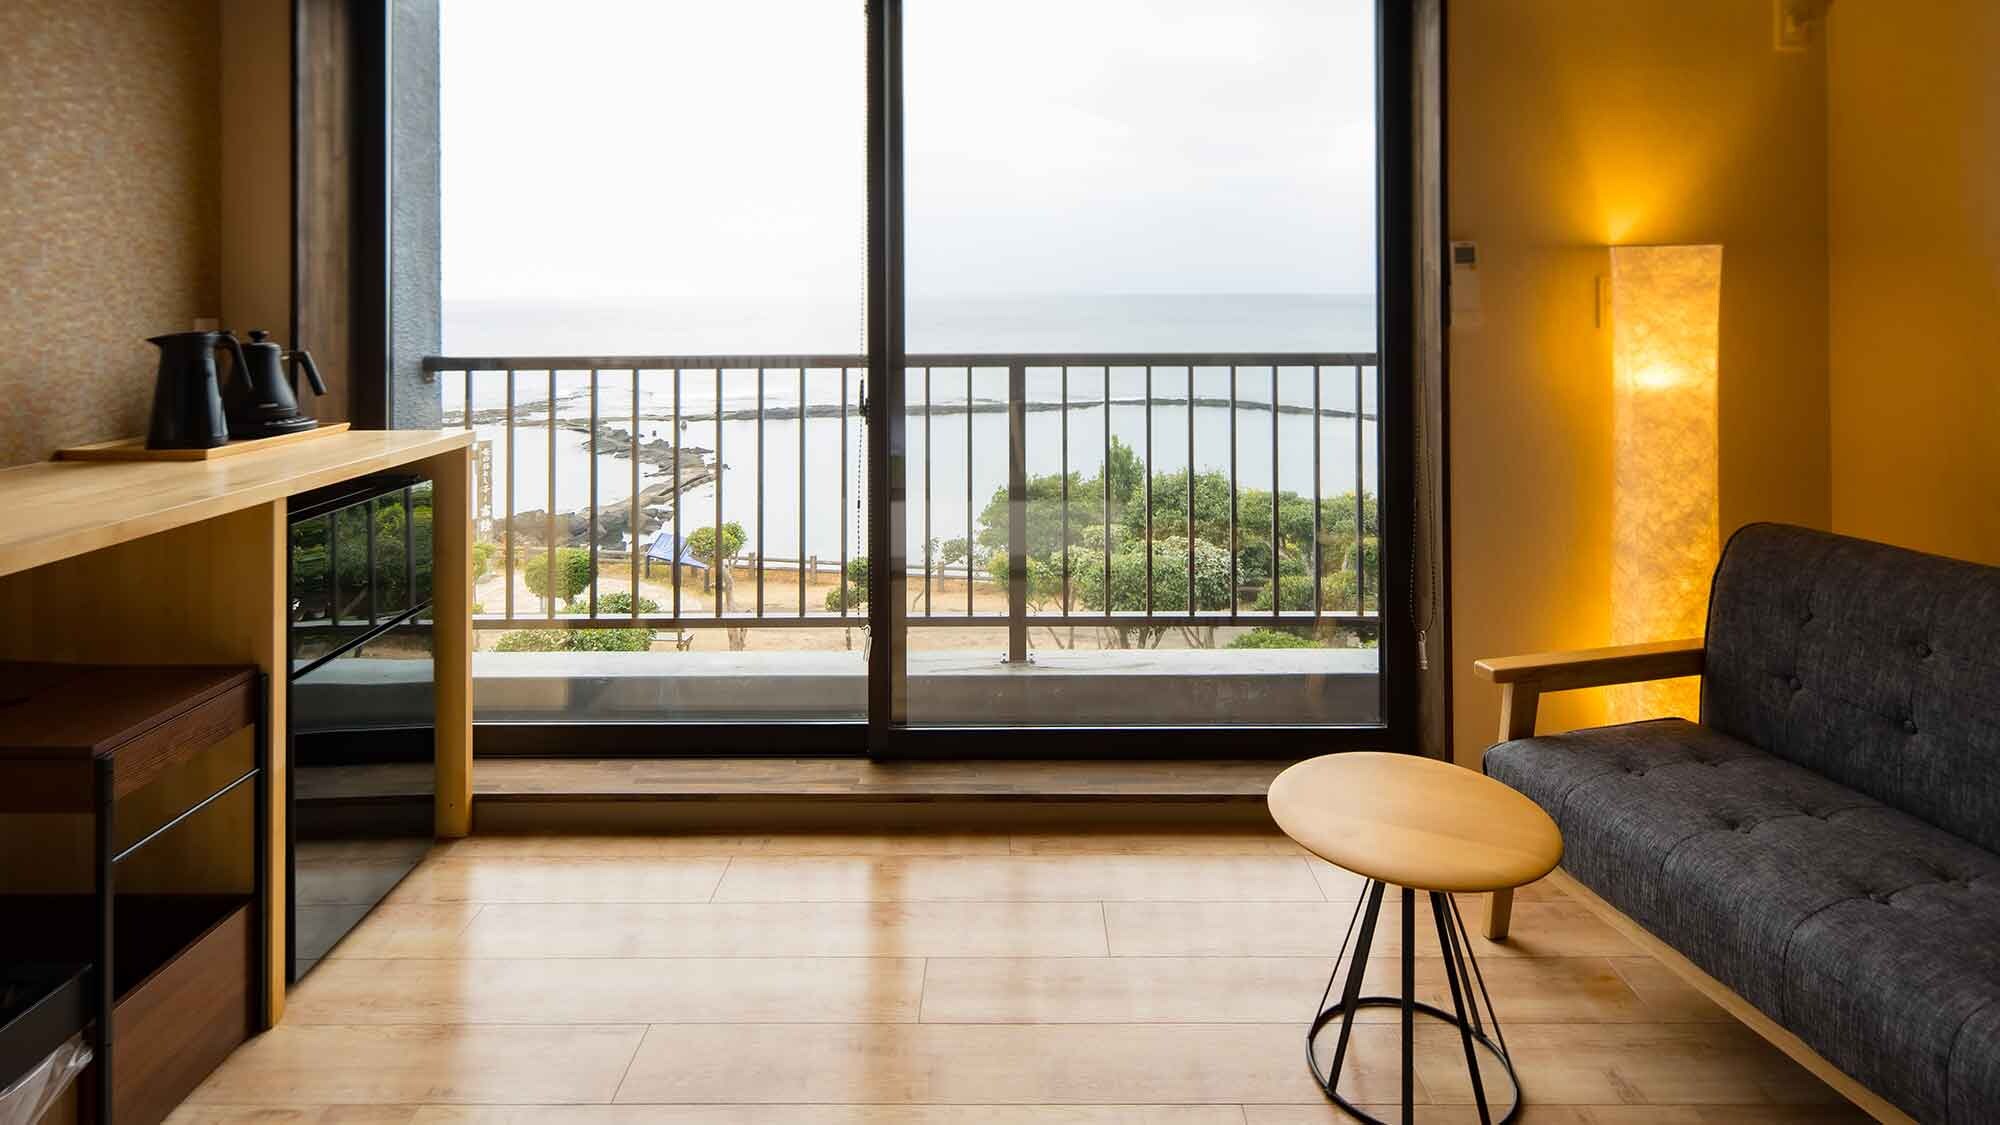 ・[An example of a Japanese-Western style room facing the sea] You can see the beautiful horizon from the modern living room